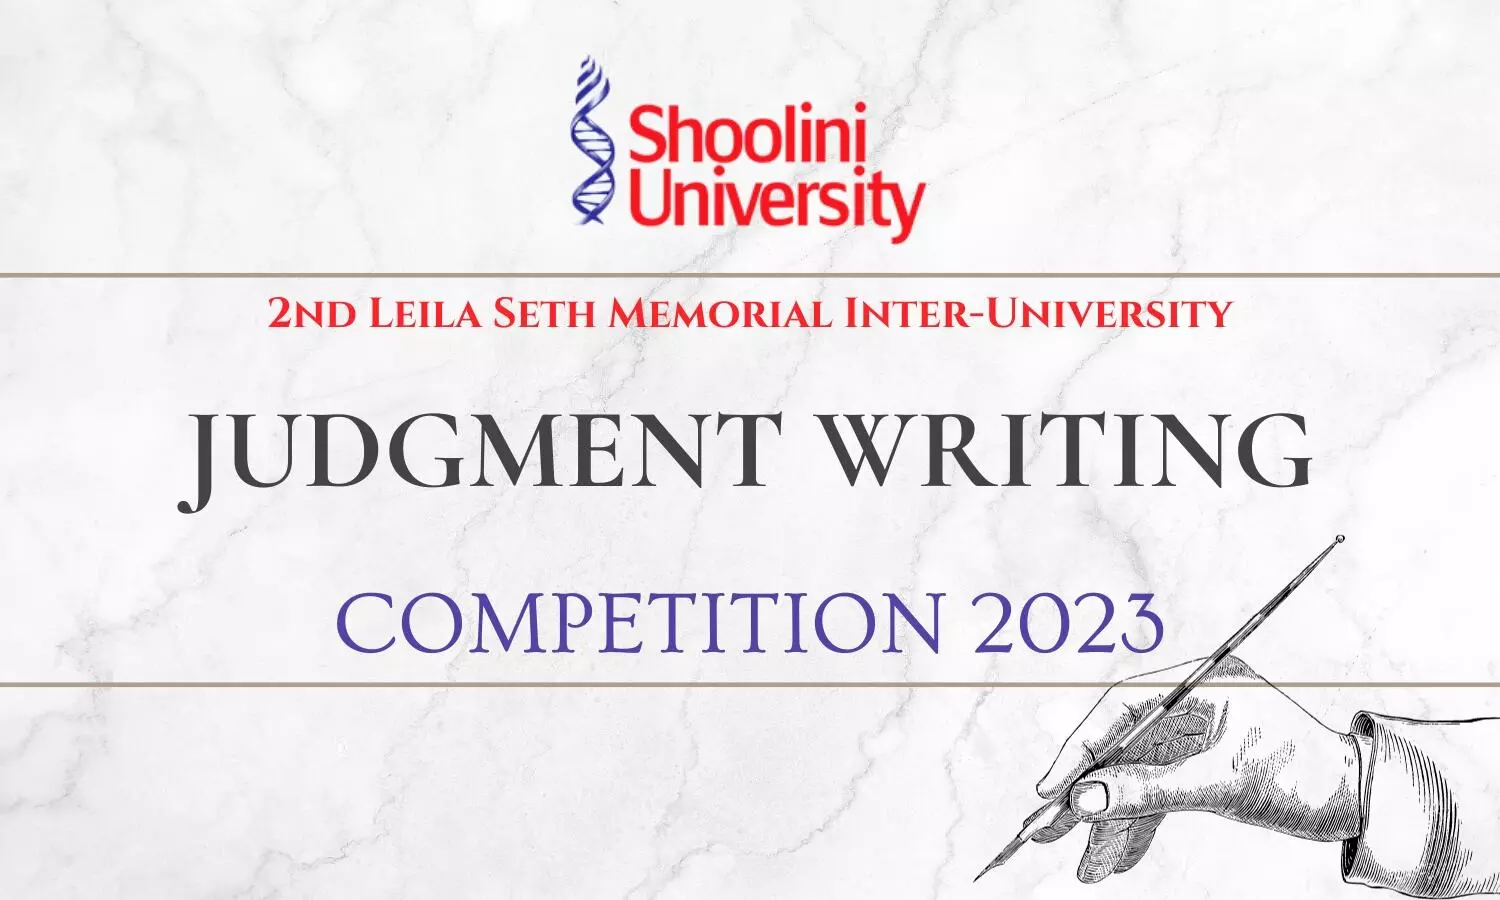 2nd Leila Seth Memorial Inter-University Judgment Writing Competition 2023